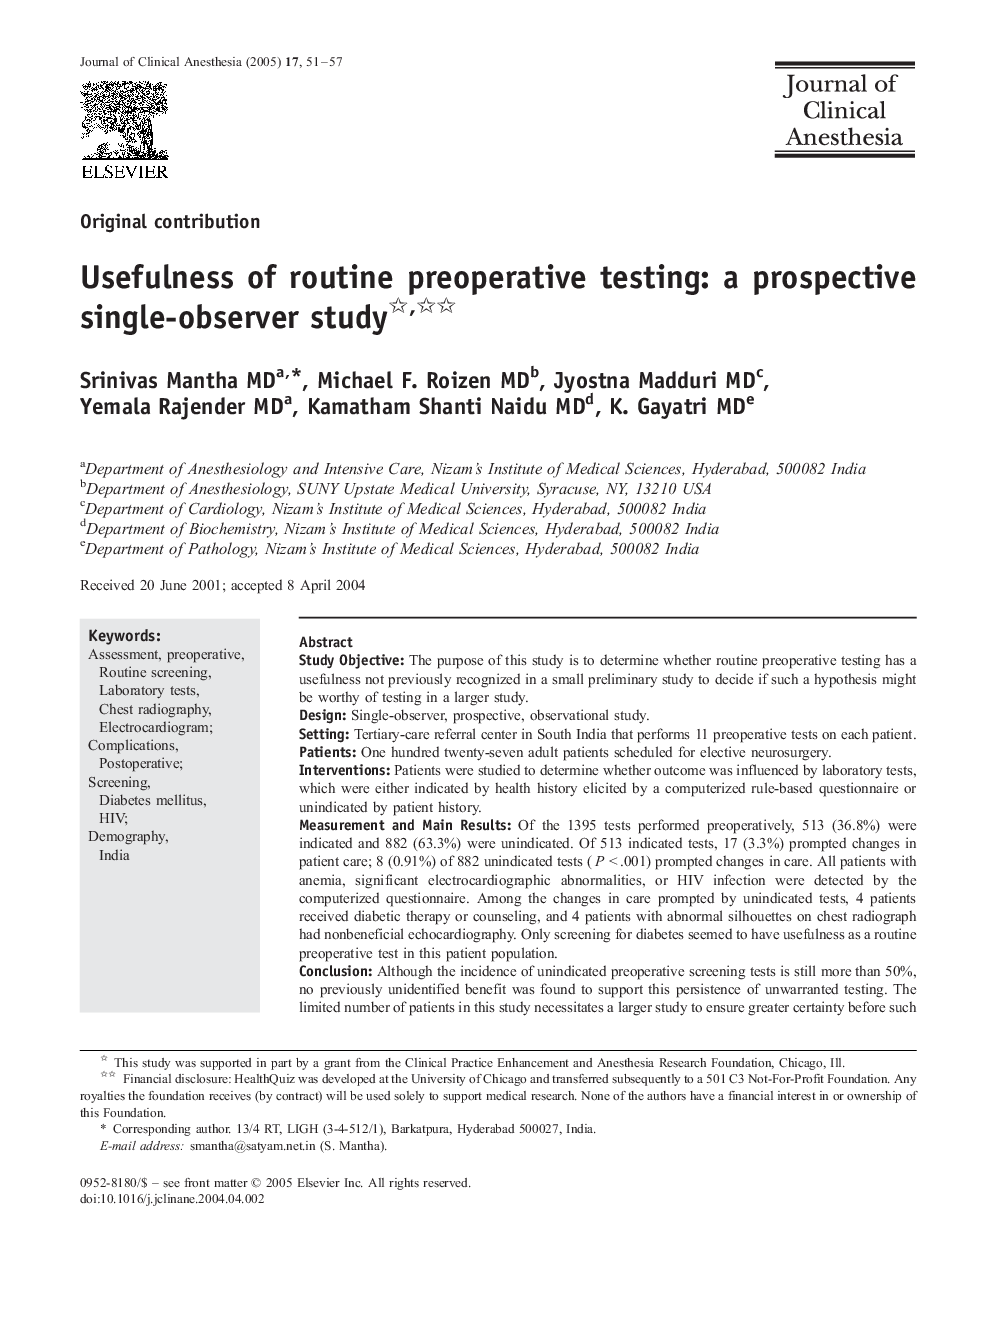 Usefulness of routine preoperative testing: a prospective single-observer study